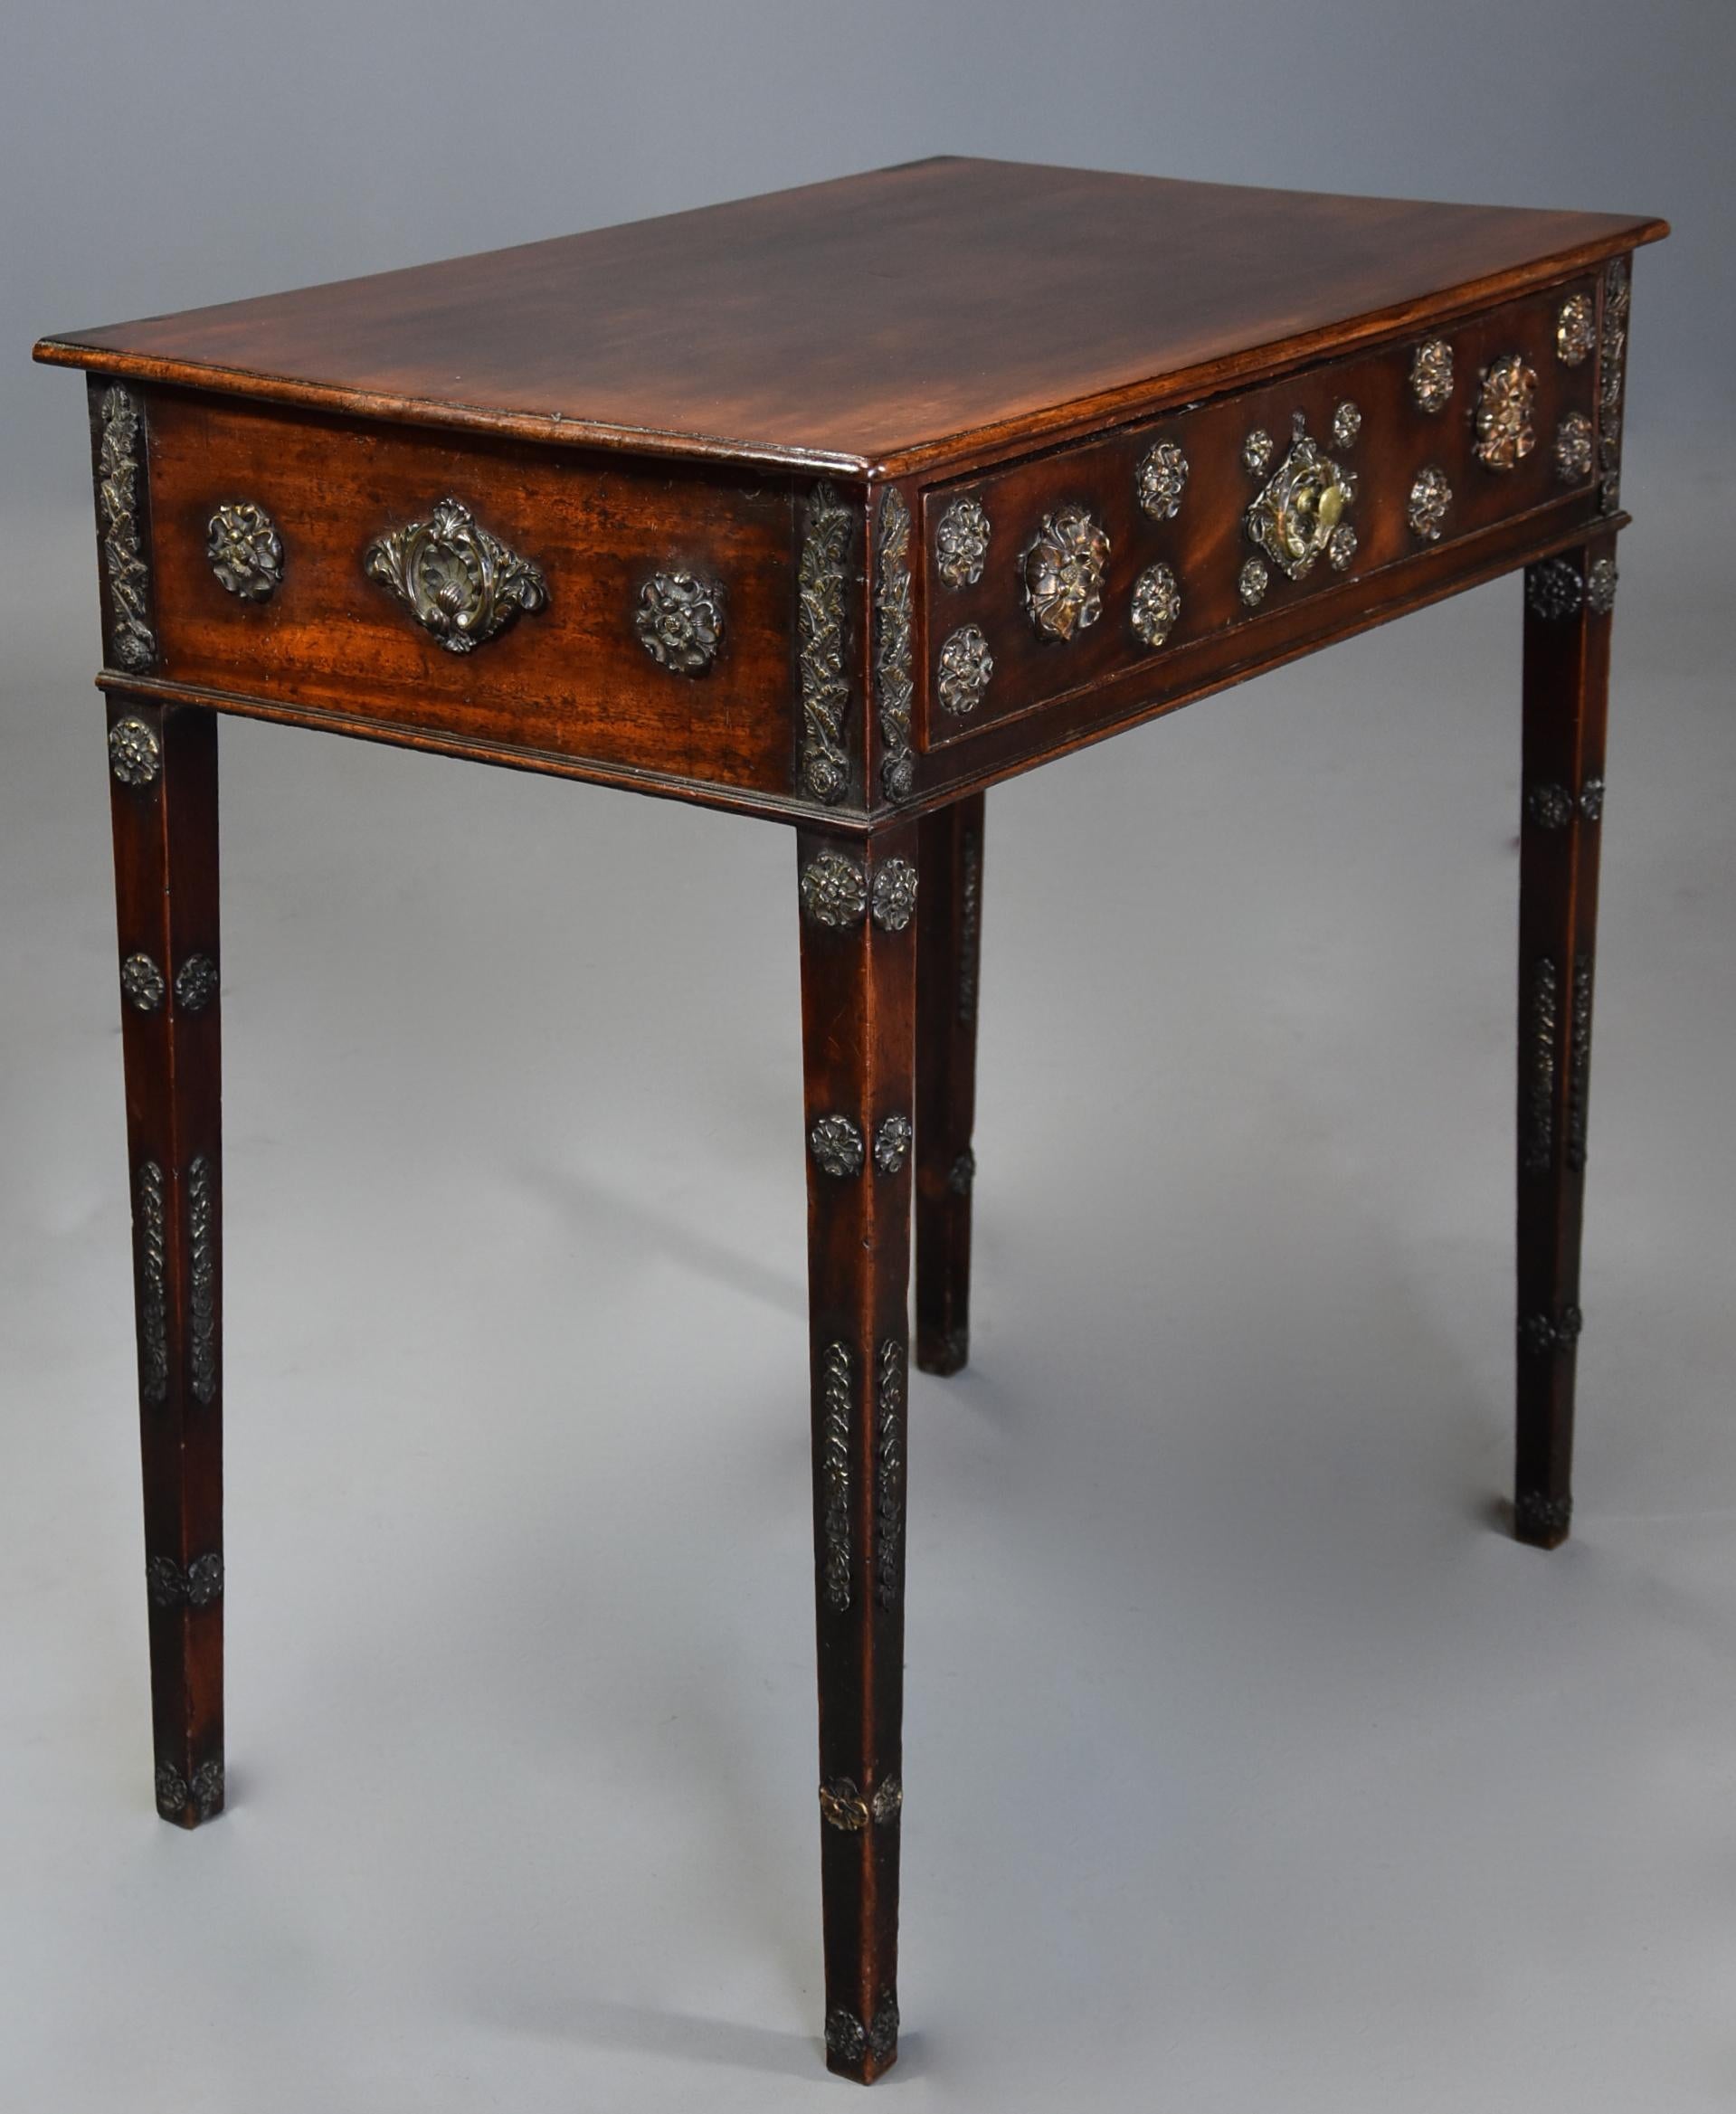 English Decorative Late 18th Century Mahogany Side Table with Later Applied Brass Mounts